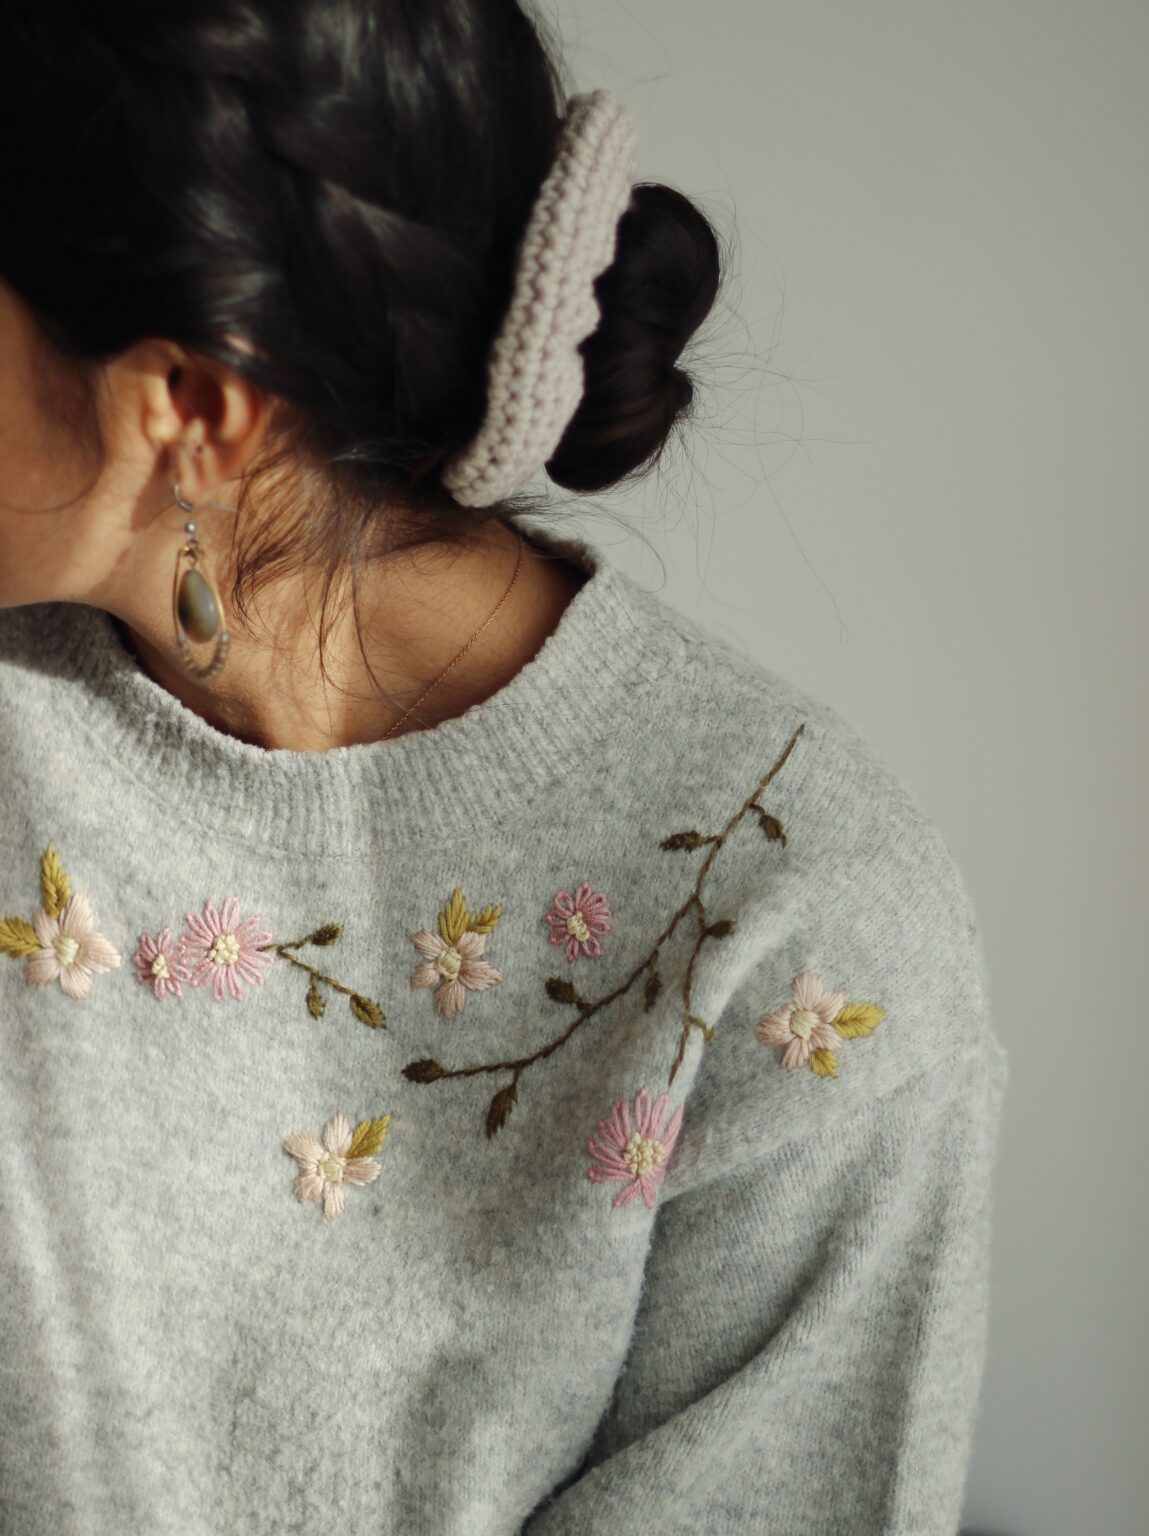 DIY Flower Embroidery on Knit Sweater - FioreLila shop